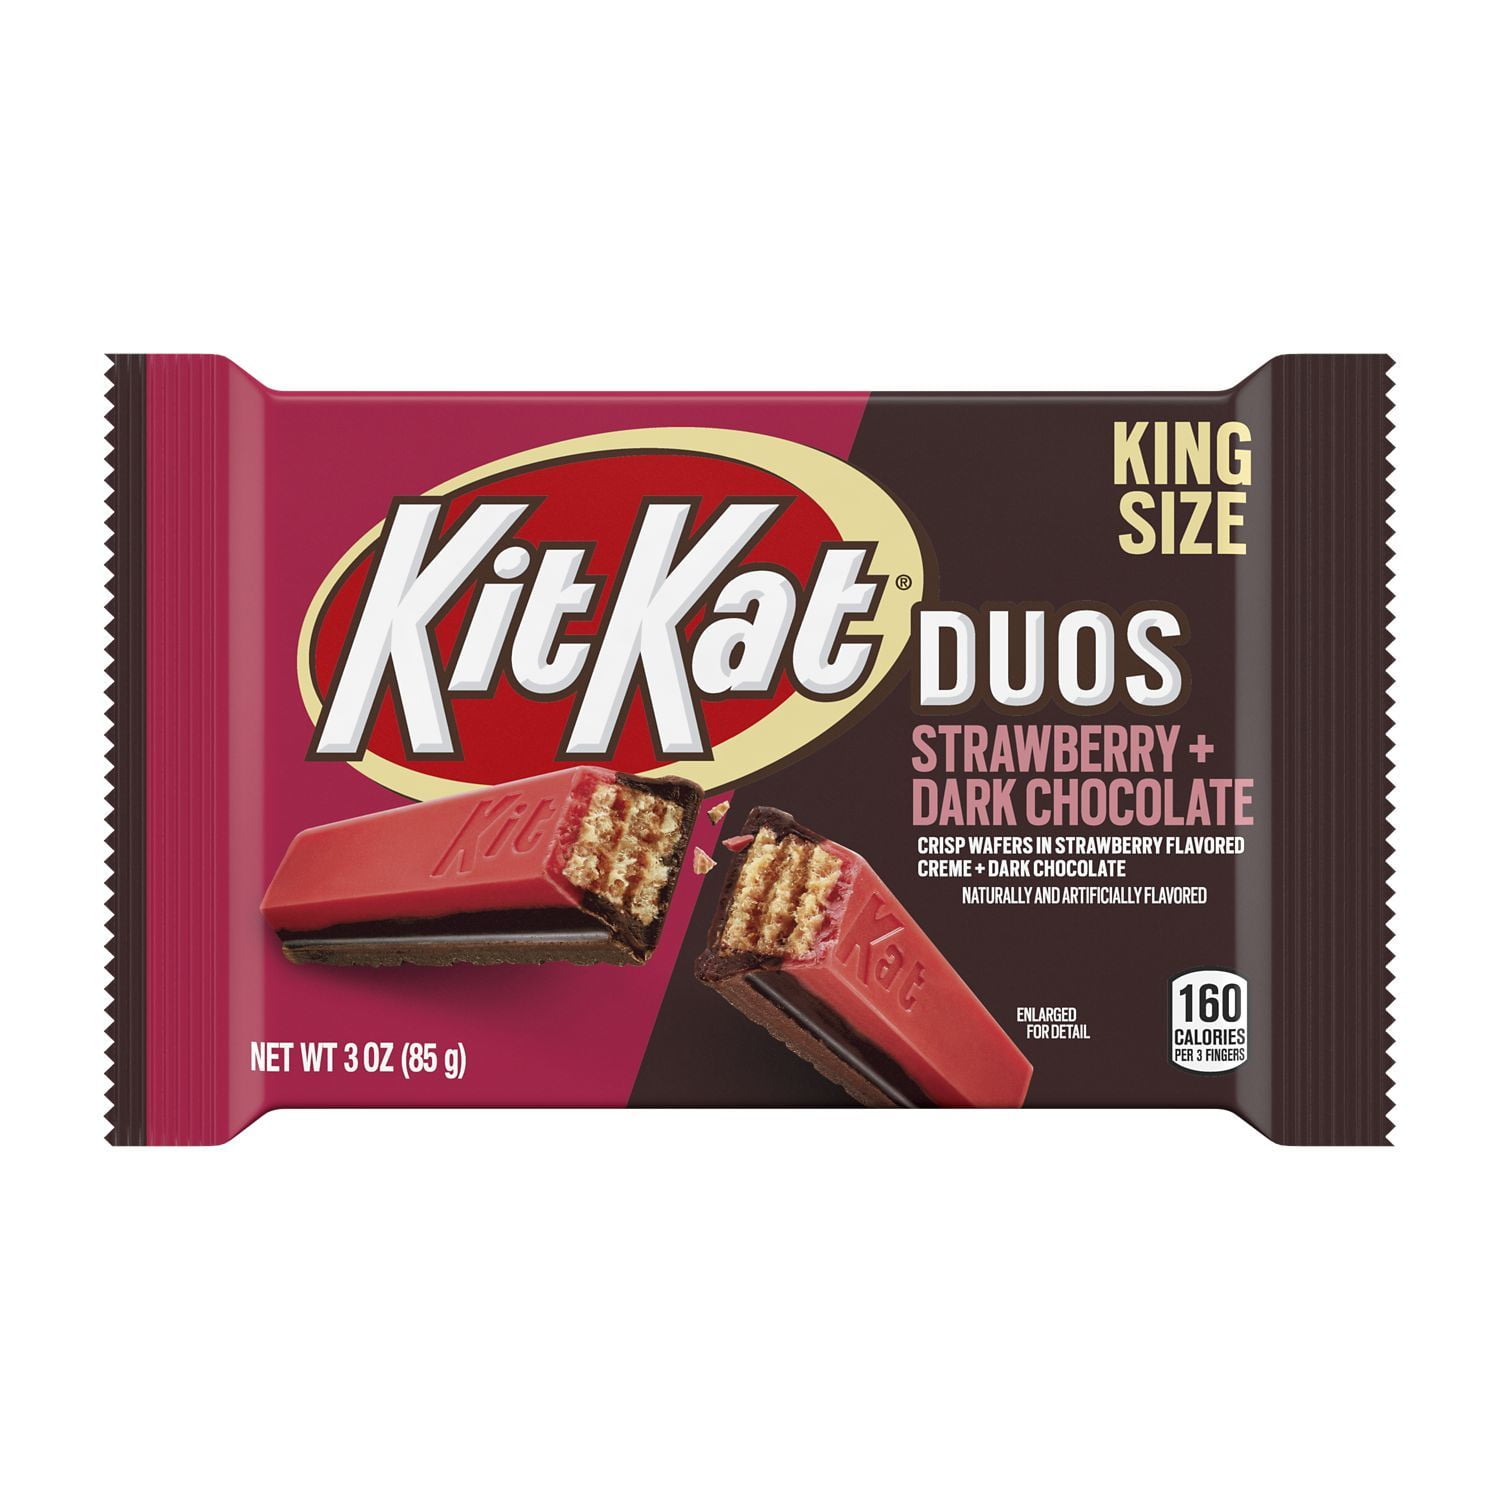 KIT KAT, DUOS Strawberry Flavored Creme and Dark Chocolate King Size Wafer Candy, 3 oz, Bar